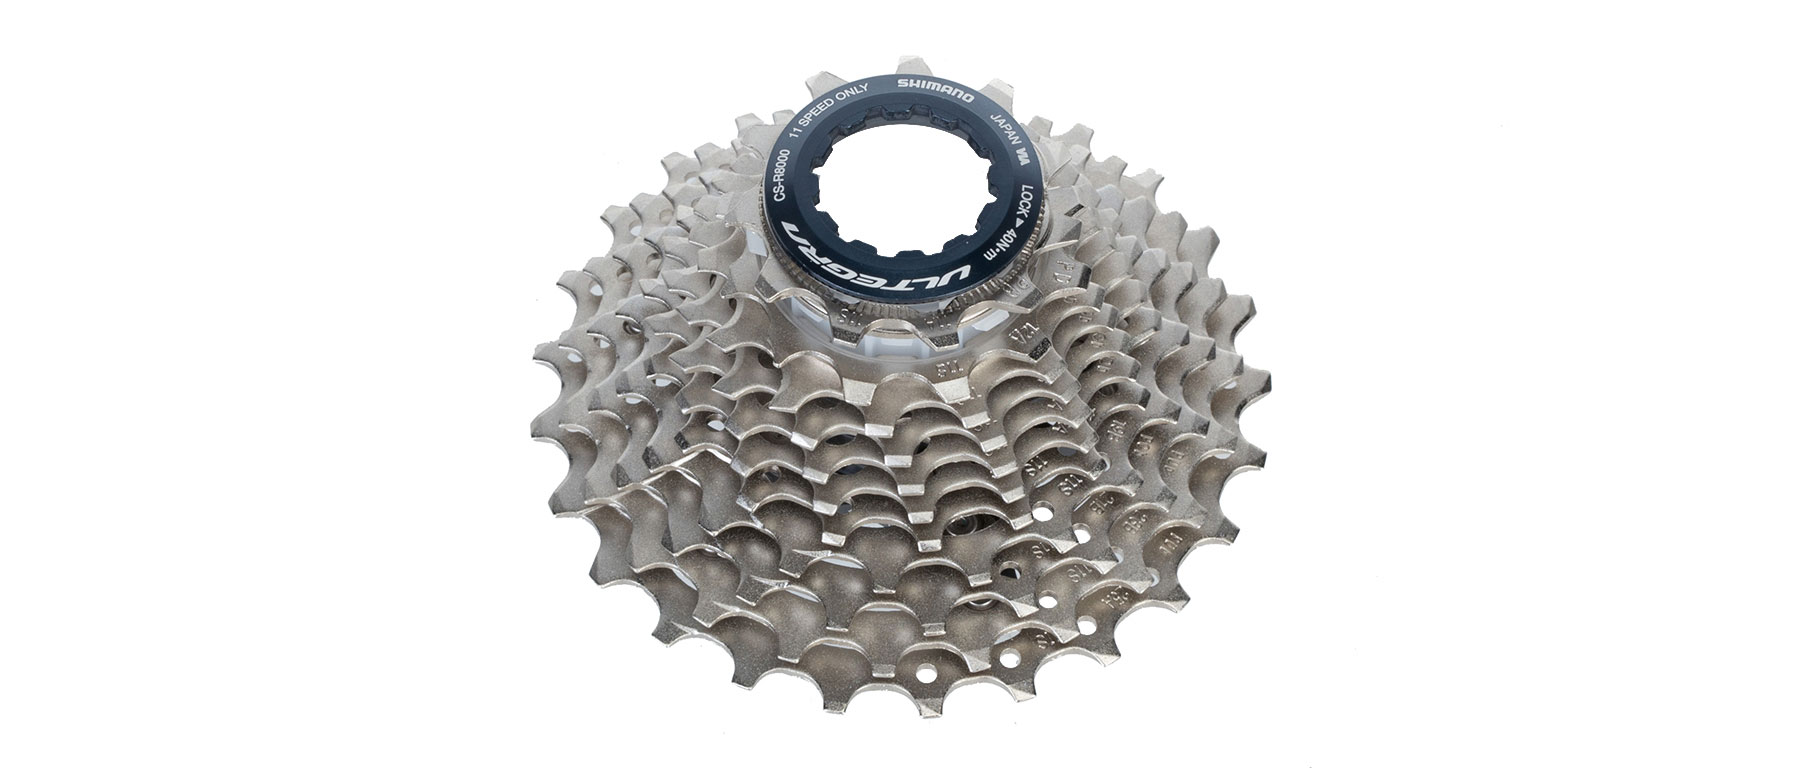 SHIMANO ULTEGRA 6800 11-SPEED NICKEL PLATED 11-32T ROAD BICYCLE CASSETTE